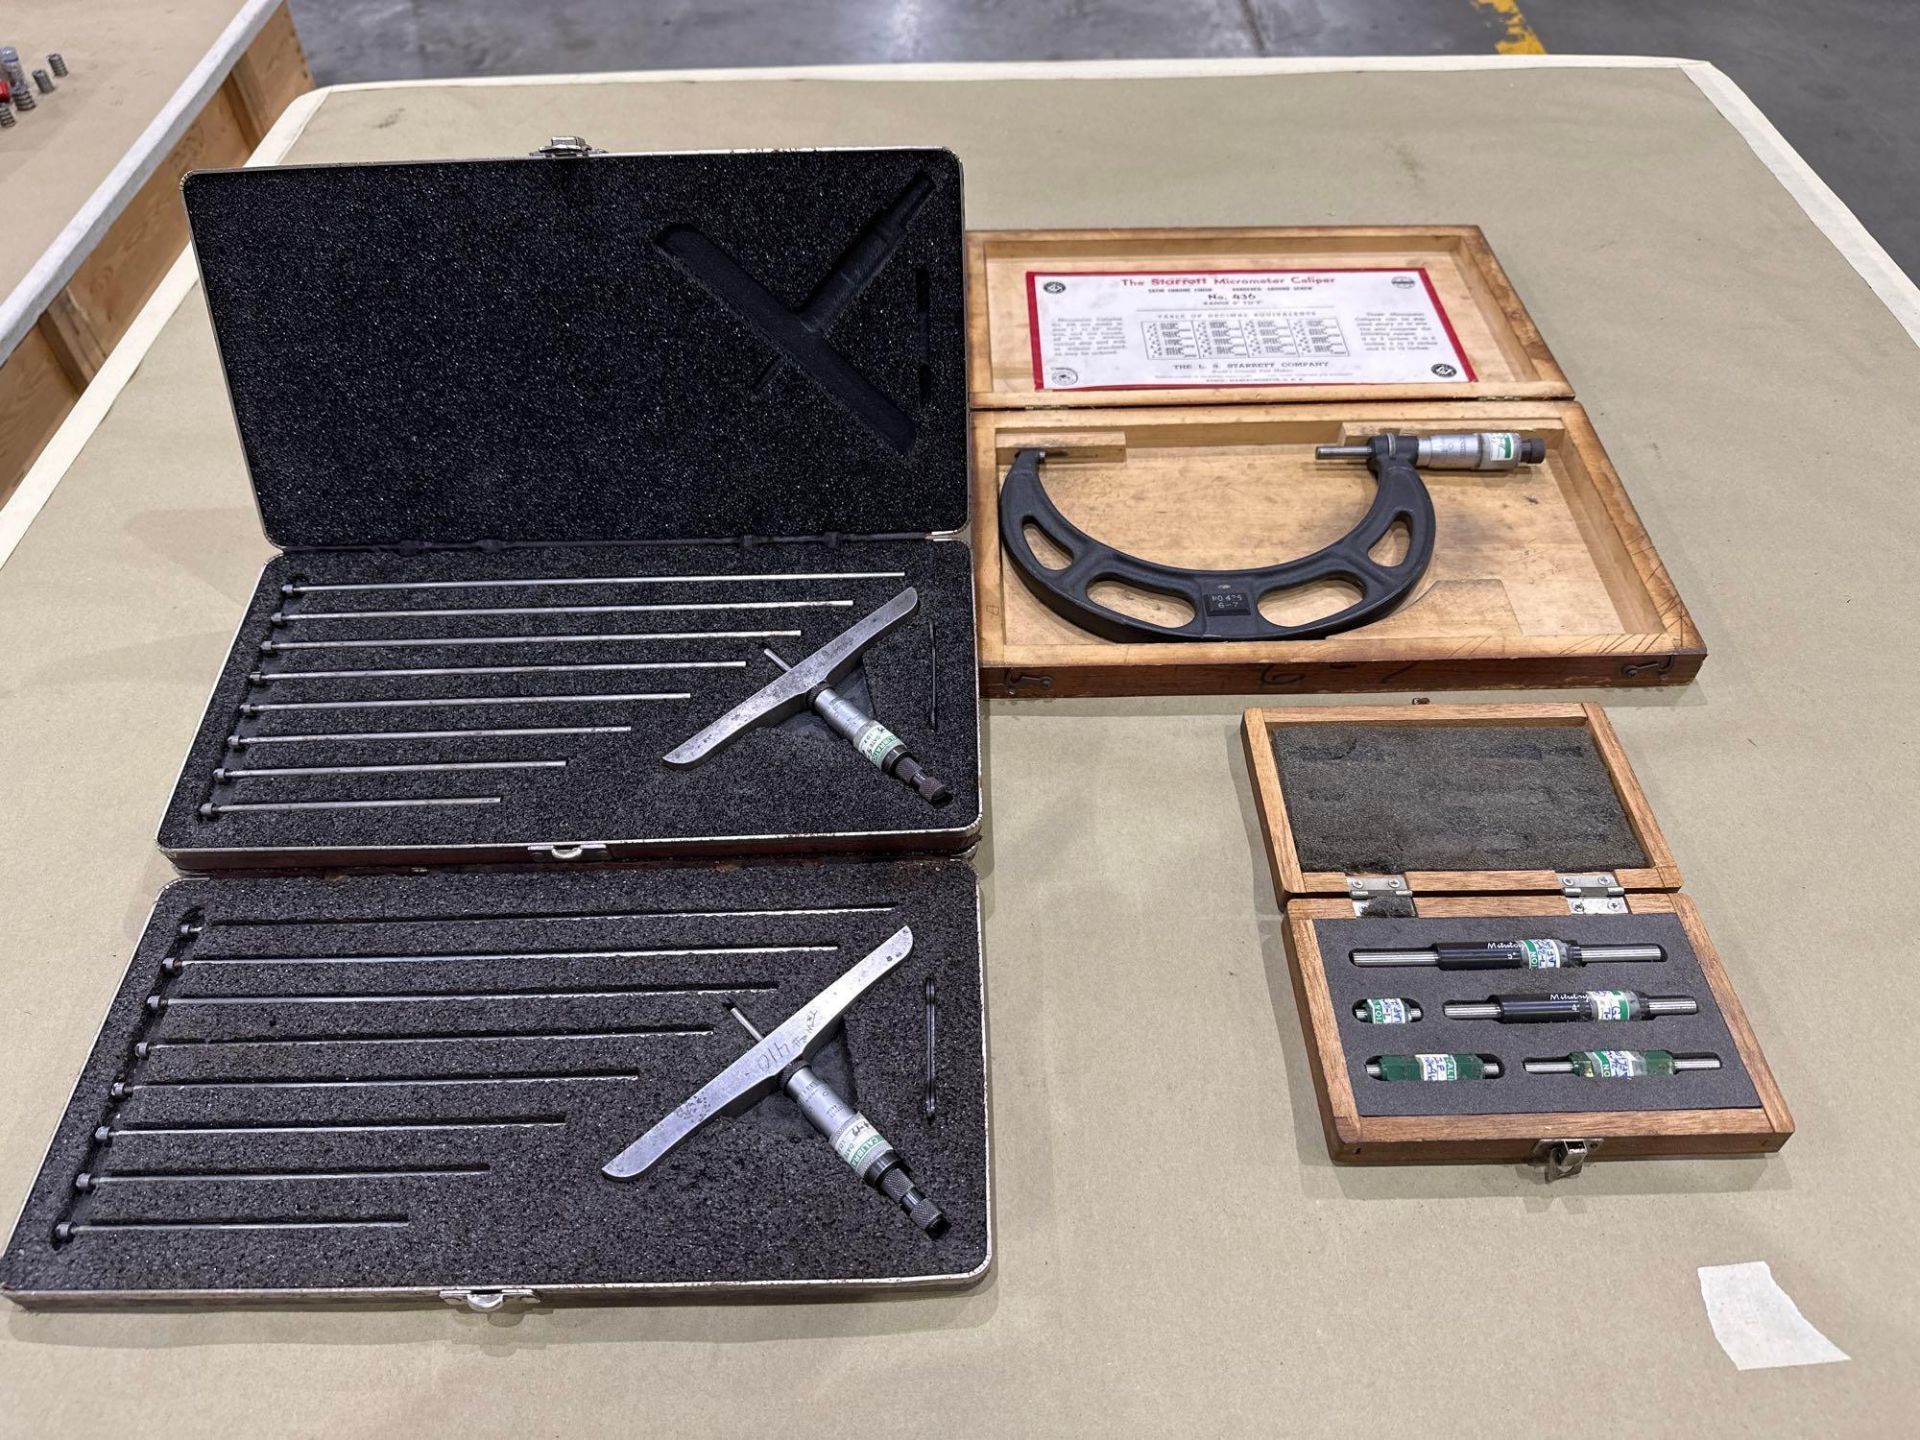 Lot of 4 Assorted Starrett and Mitutoyo Micrometers: Depth, OD, Standard Sets. See Detail